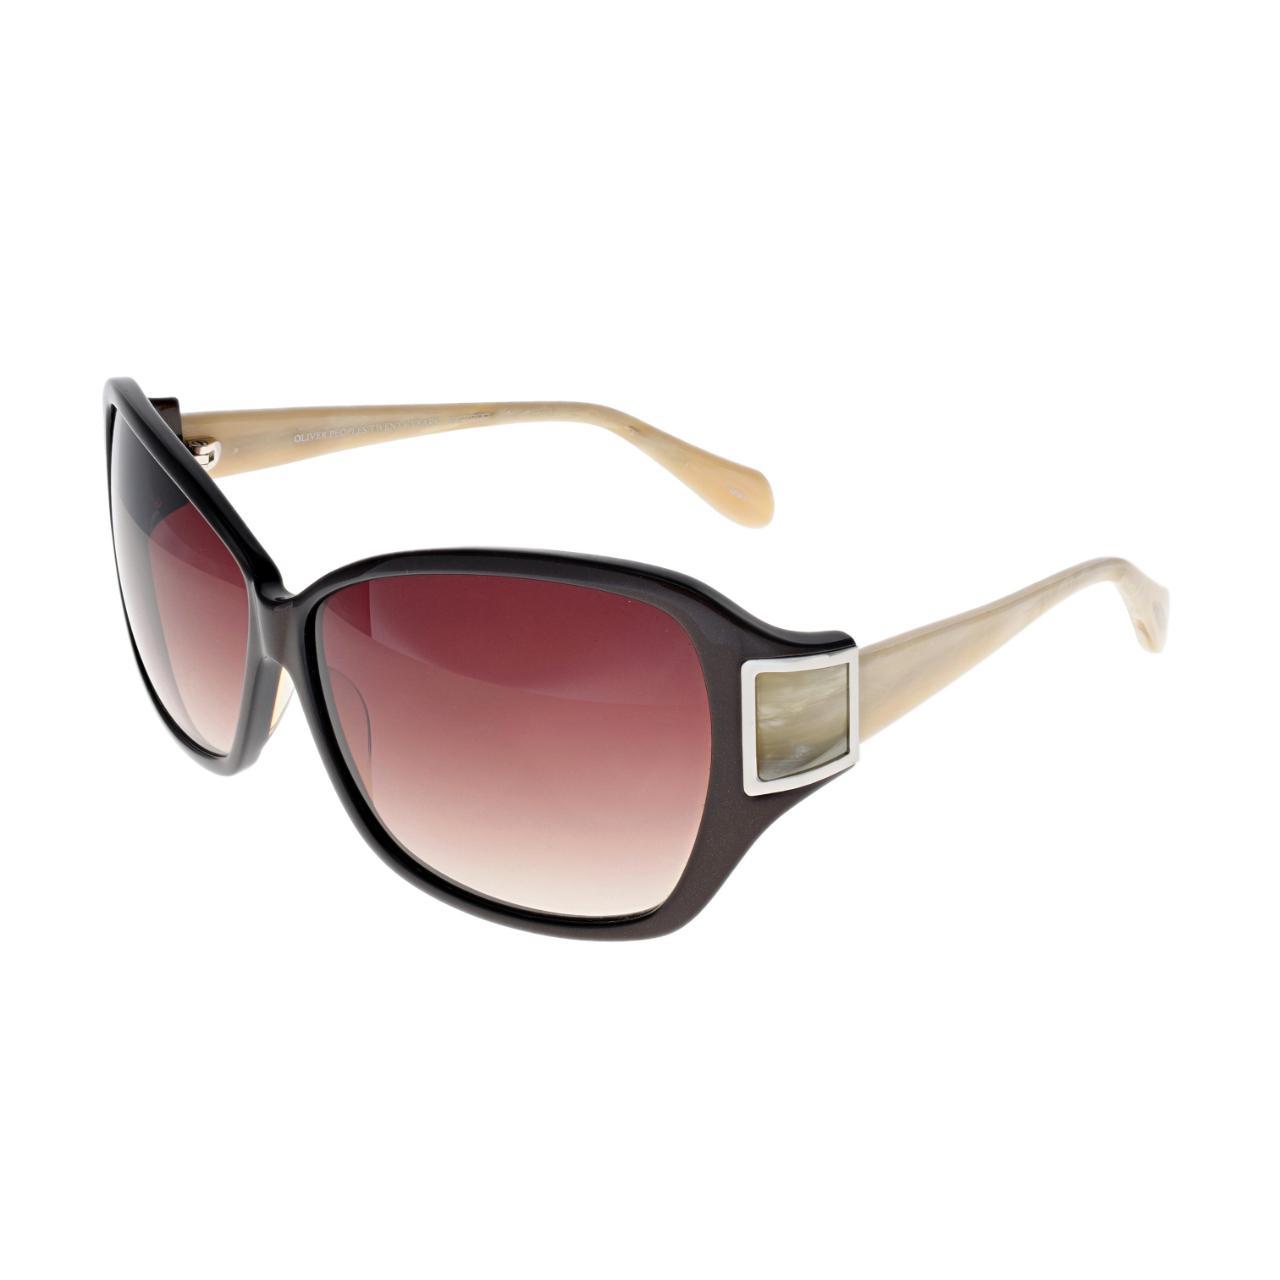 Oliver Peoples Women's Black and Cream Sunglasses